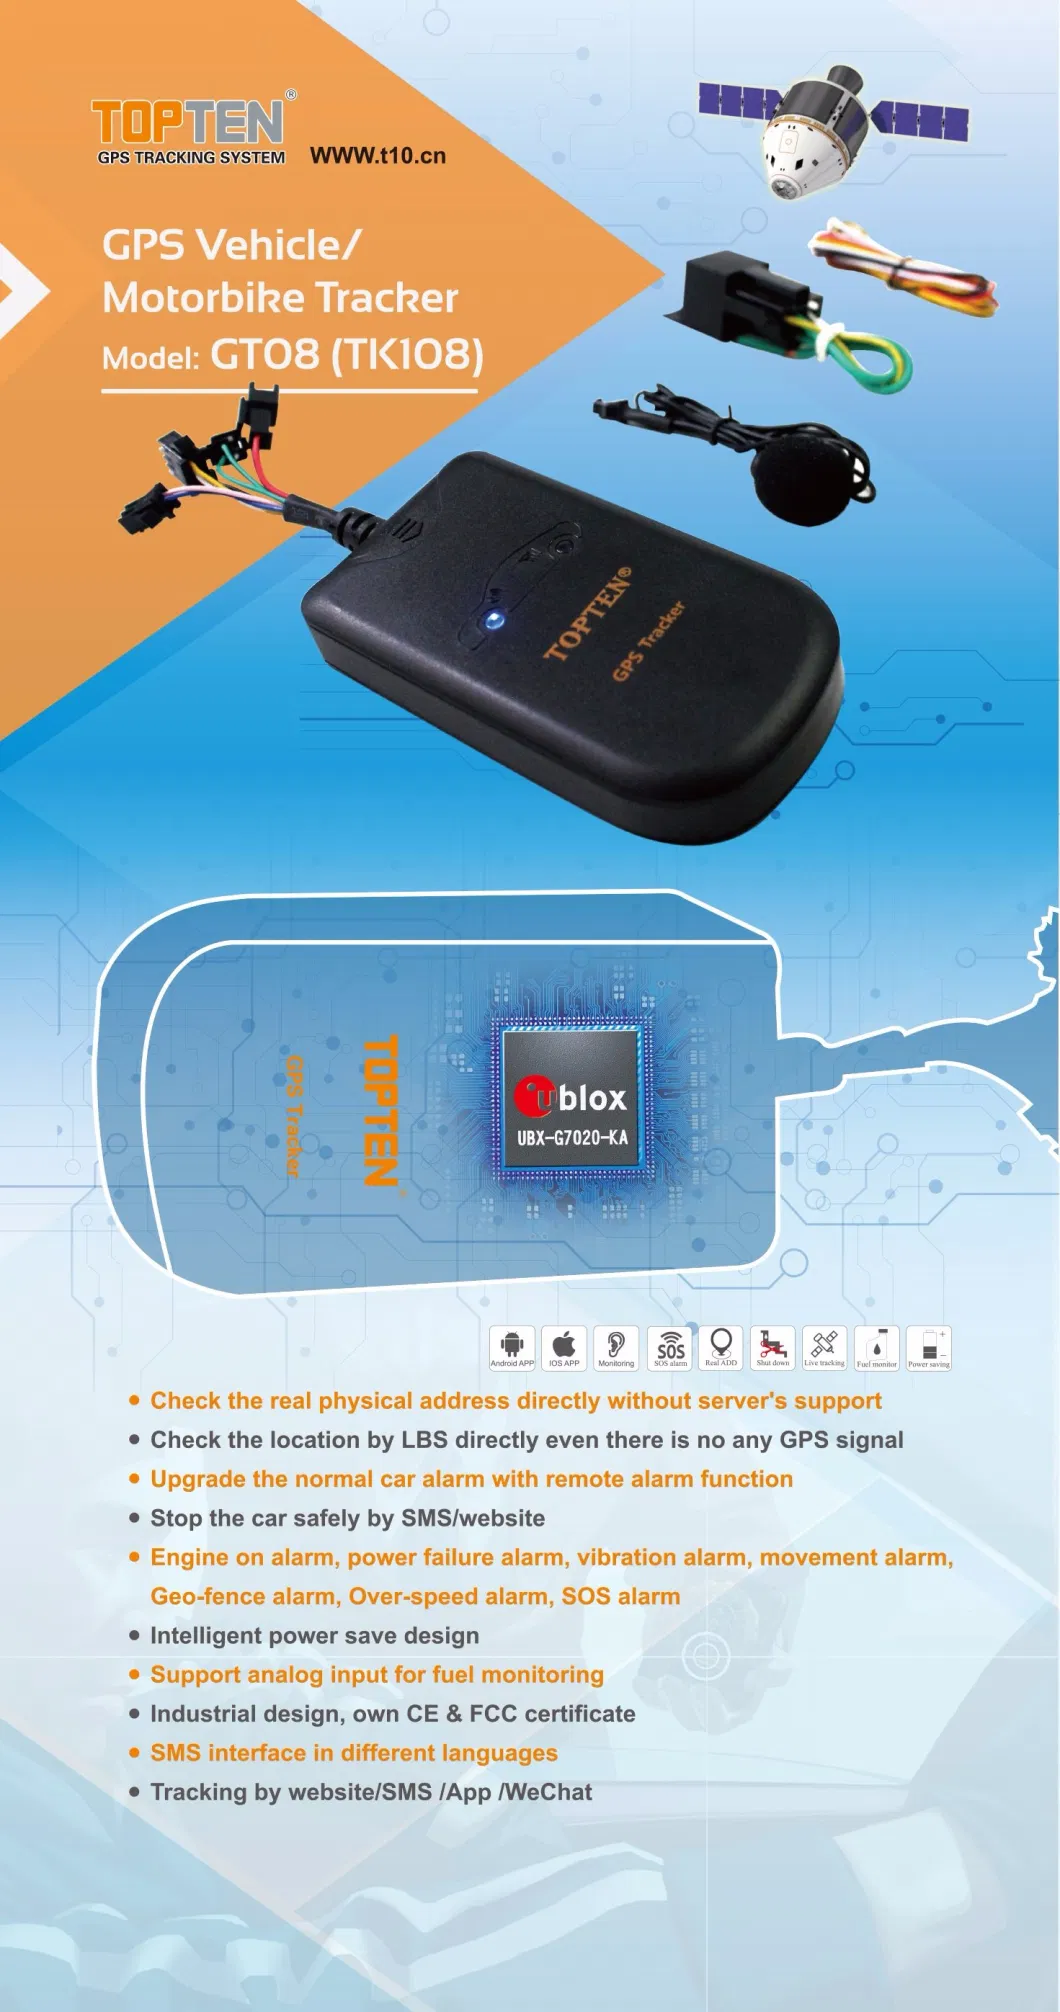 Read Time GPS Tracking Device with RFID Tracking by SMS Mobile APP (TN)